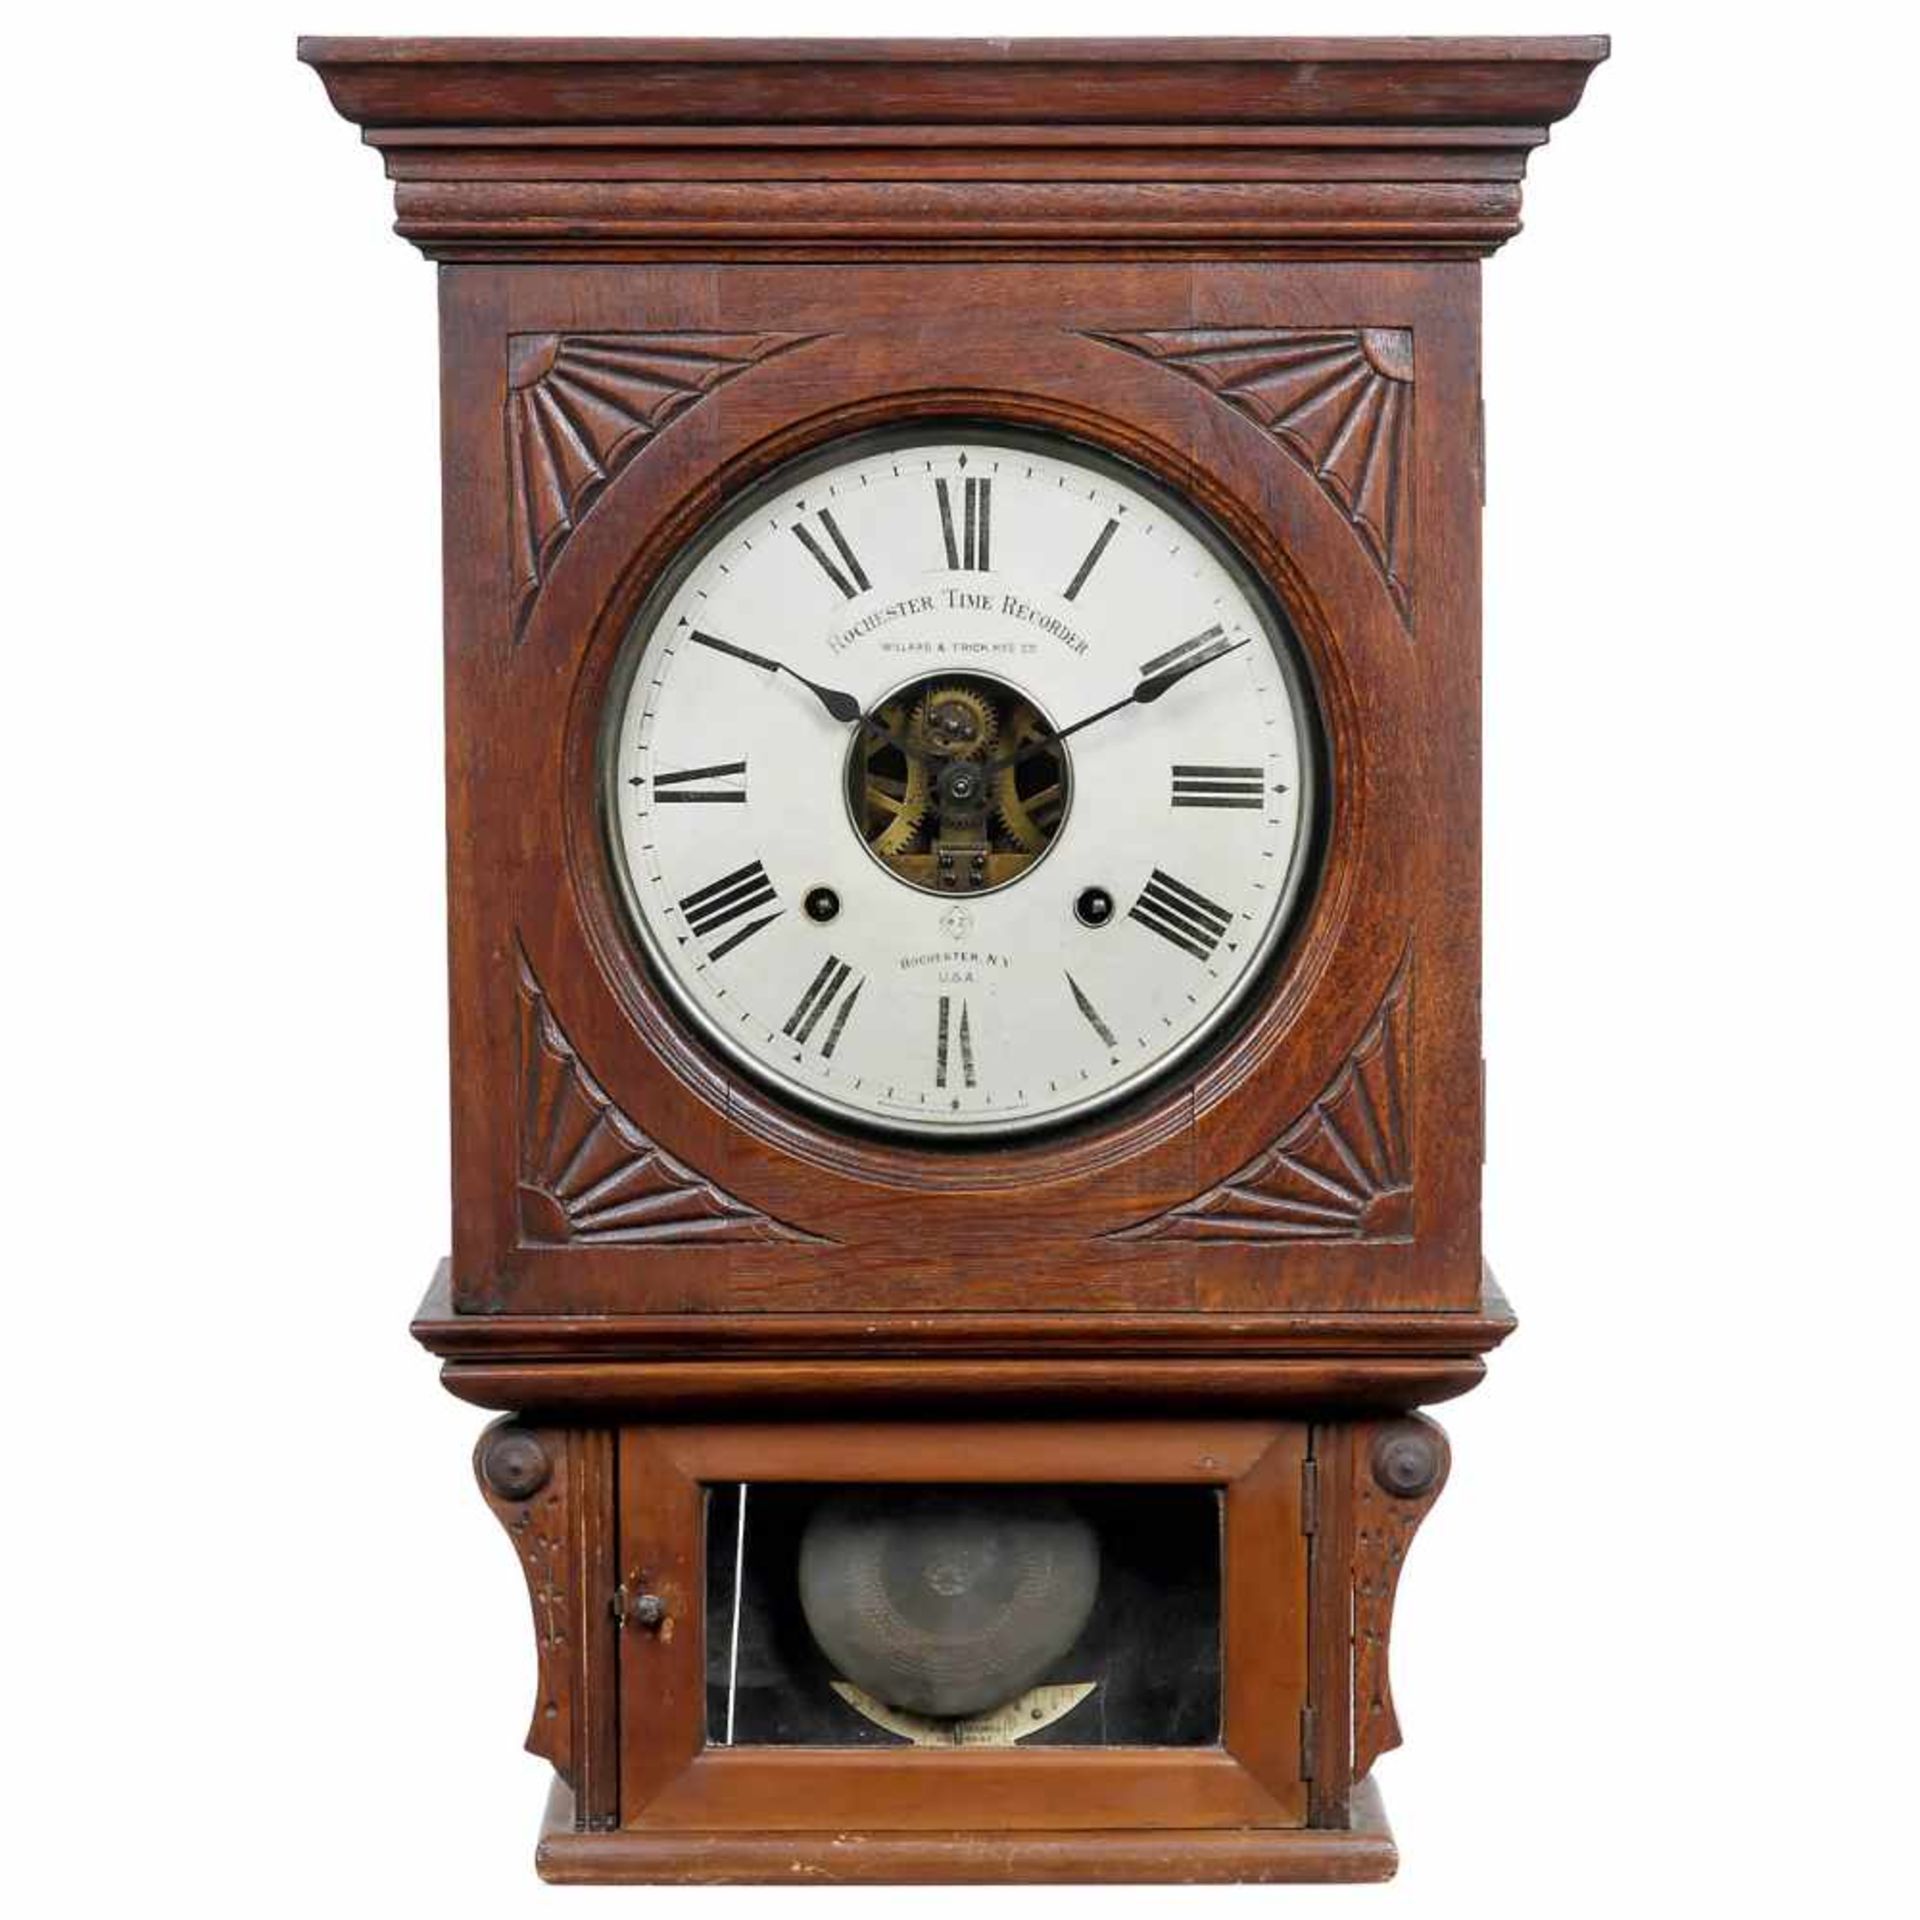 American Wall Clock with Visible Mechanism, c. 1900Manufactured by Rochester Time Recorder